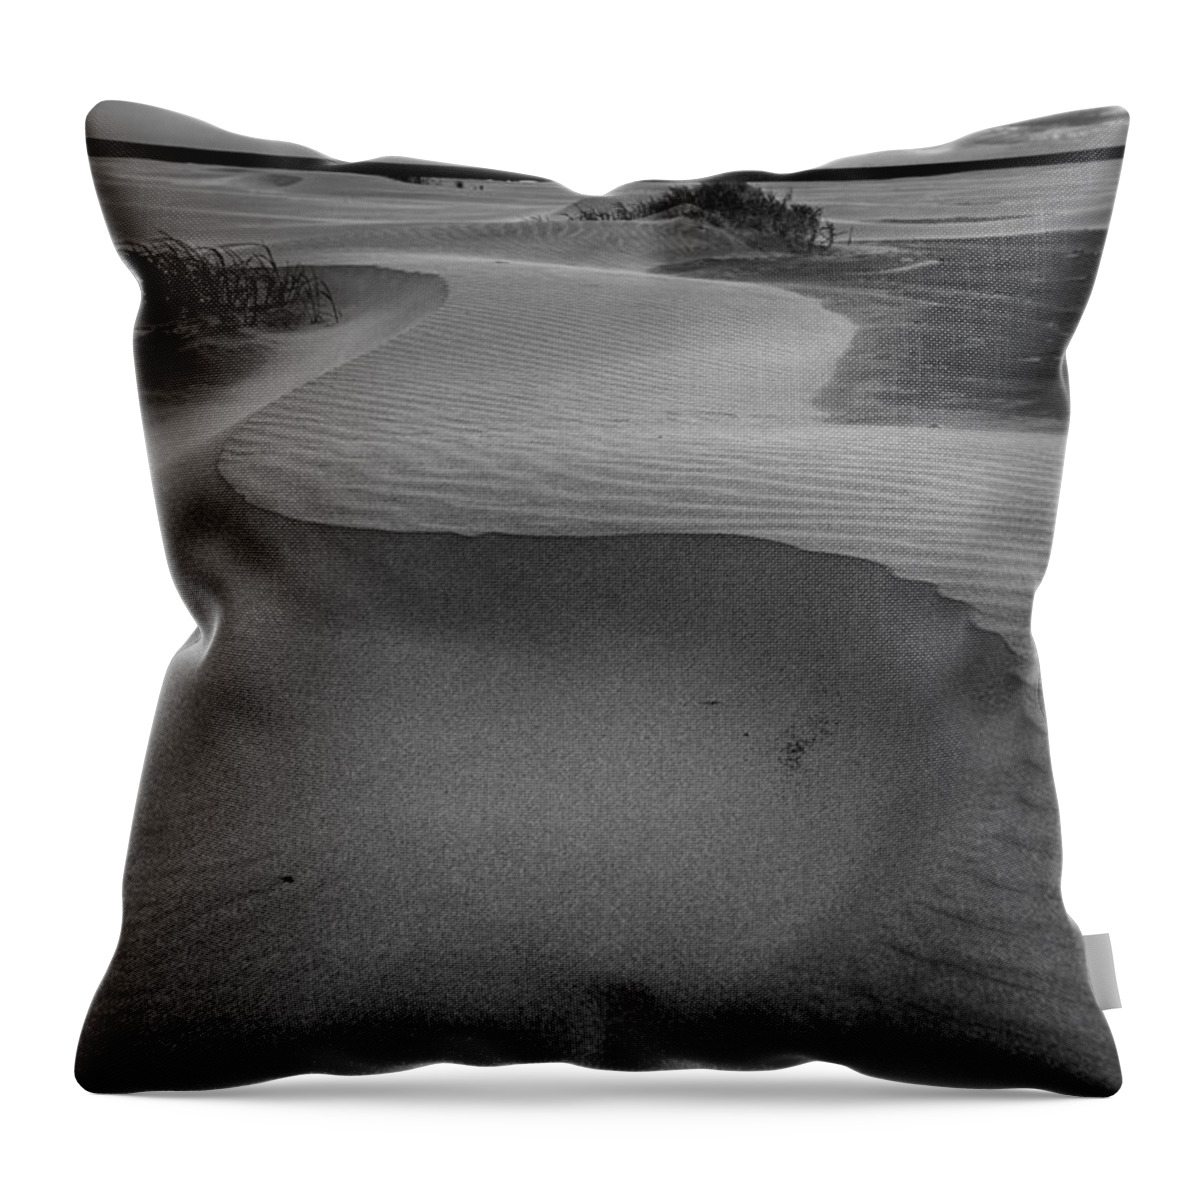 Benone Throw Pillow featuring the photograph Benone Curves by Nigel R Bell